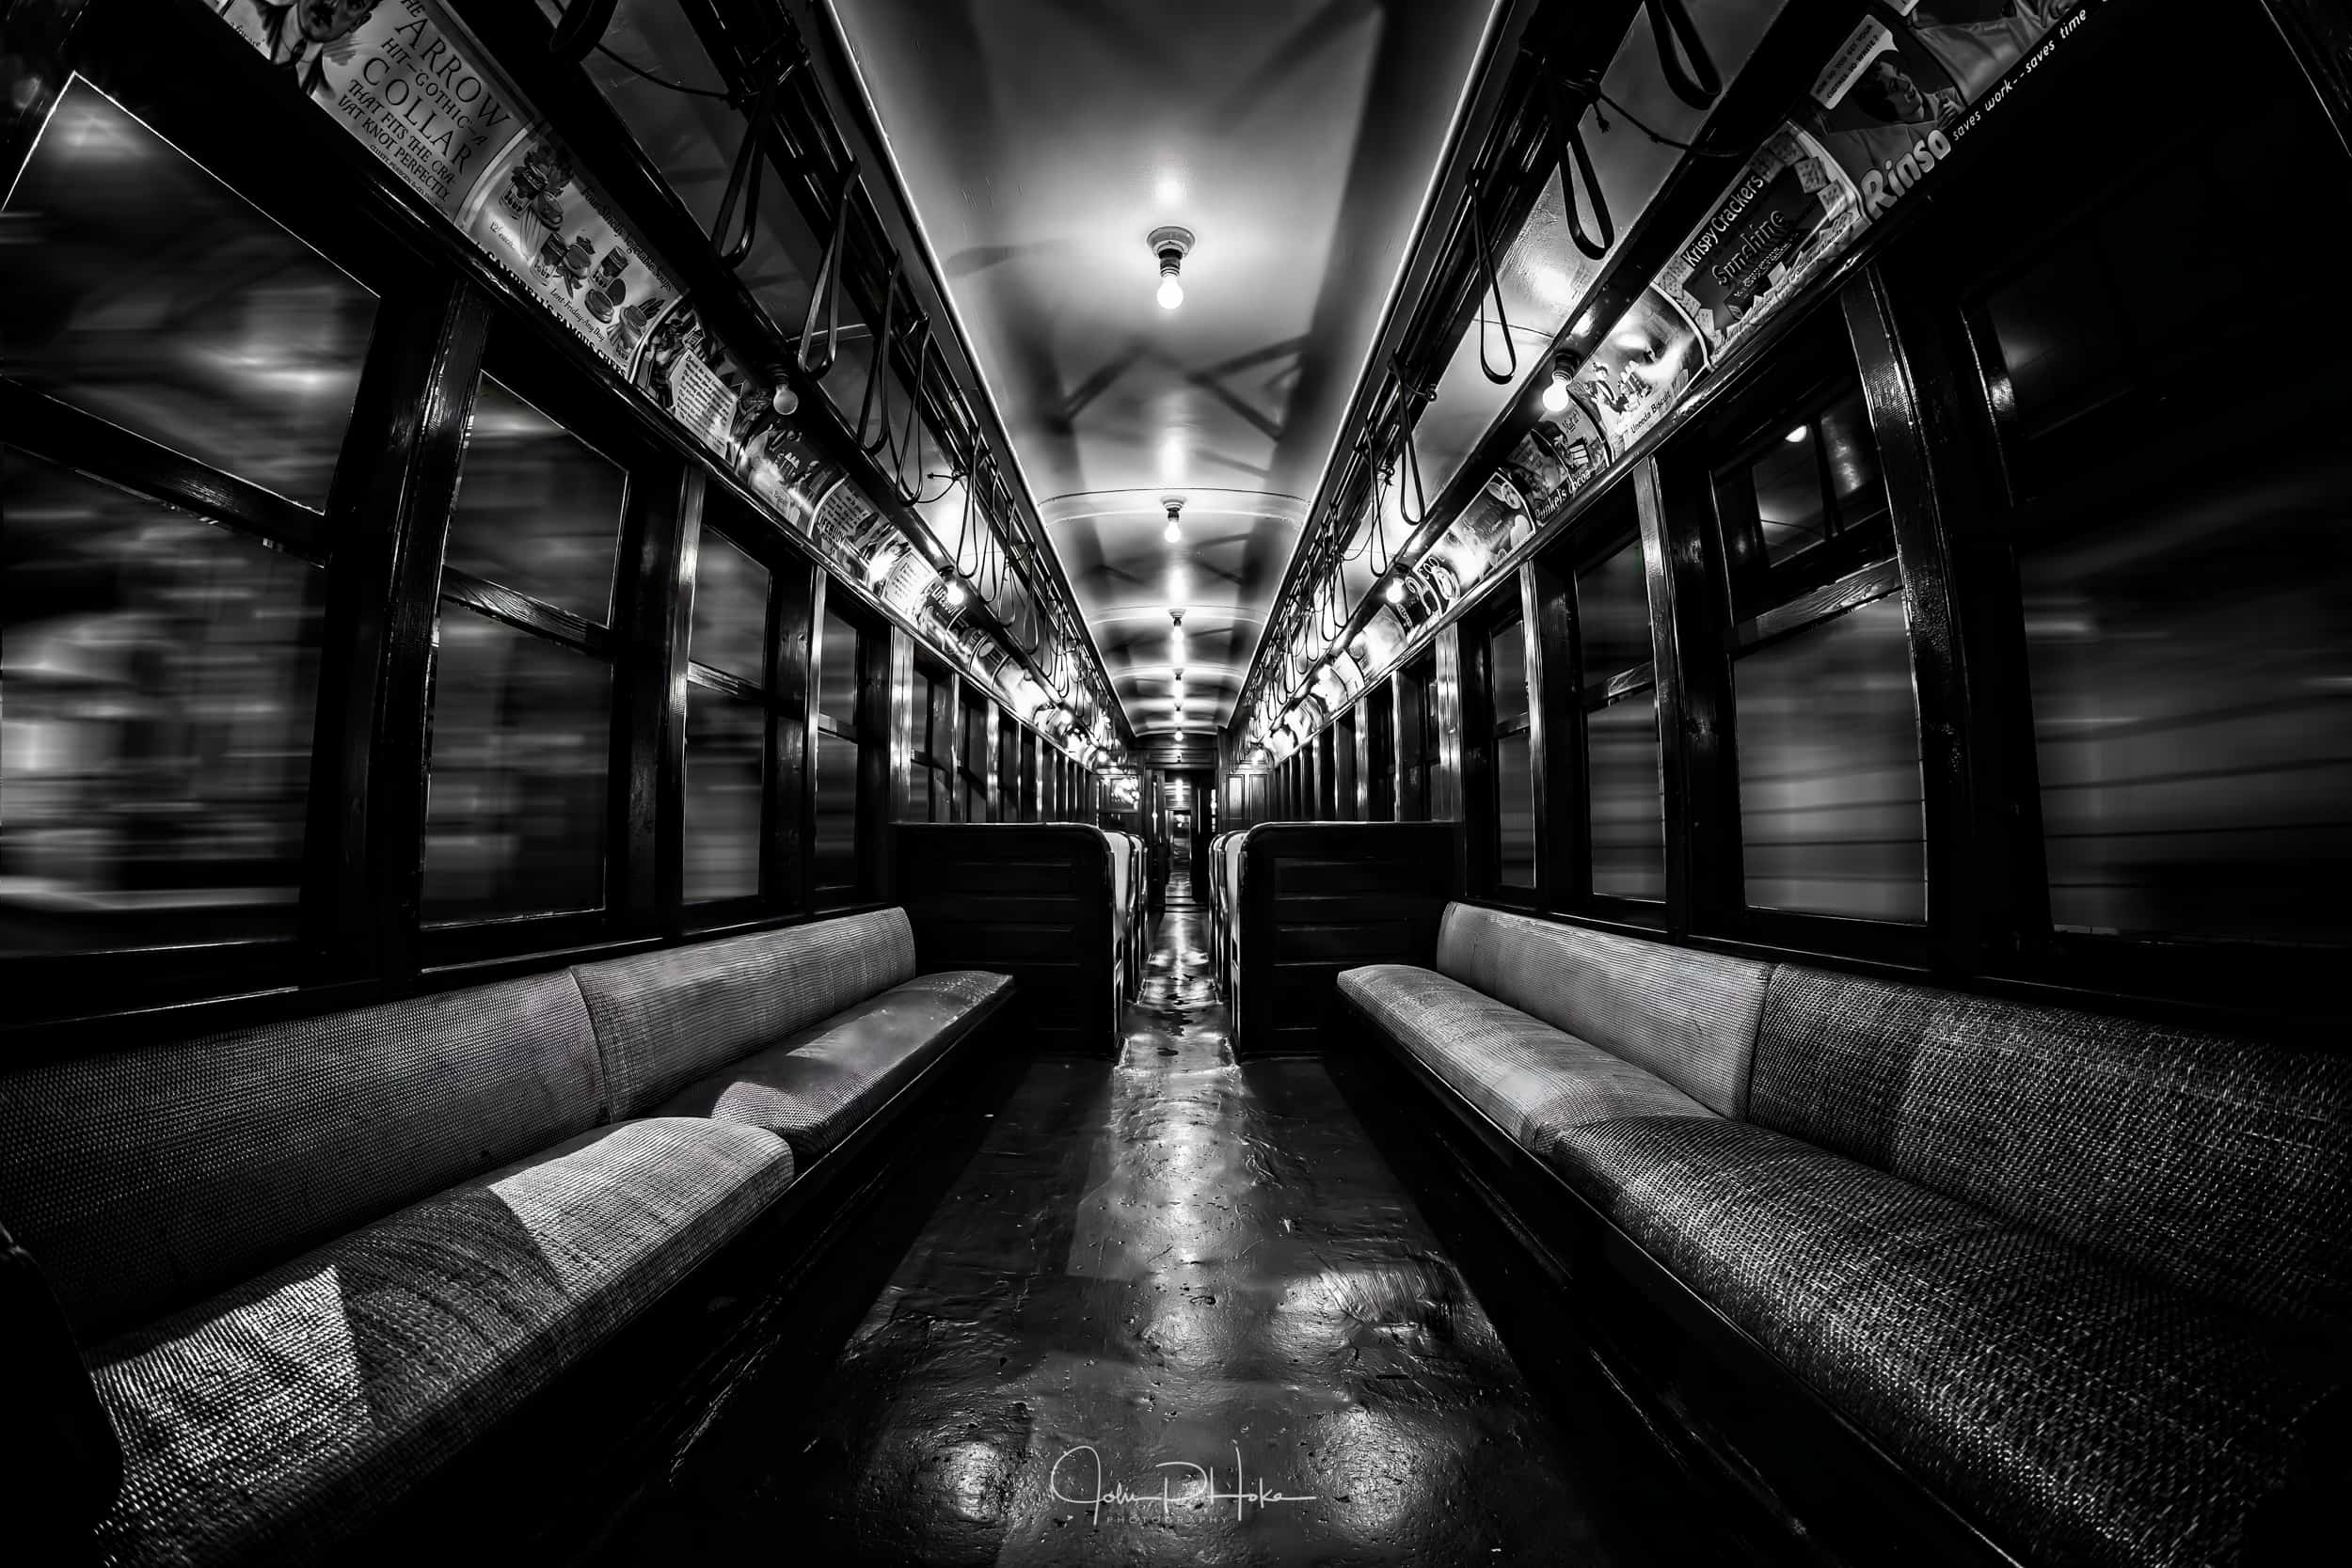 NY Transit Museum – Moving in Time